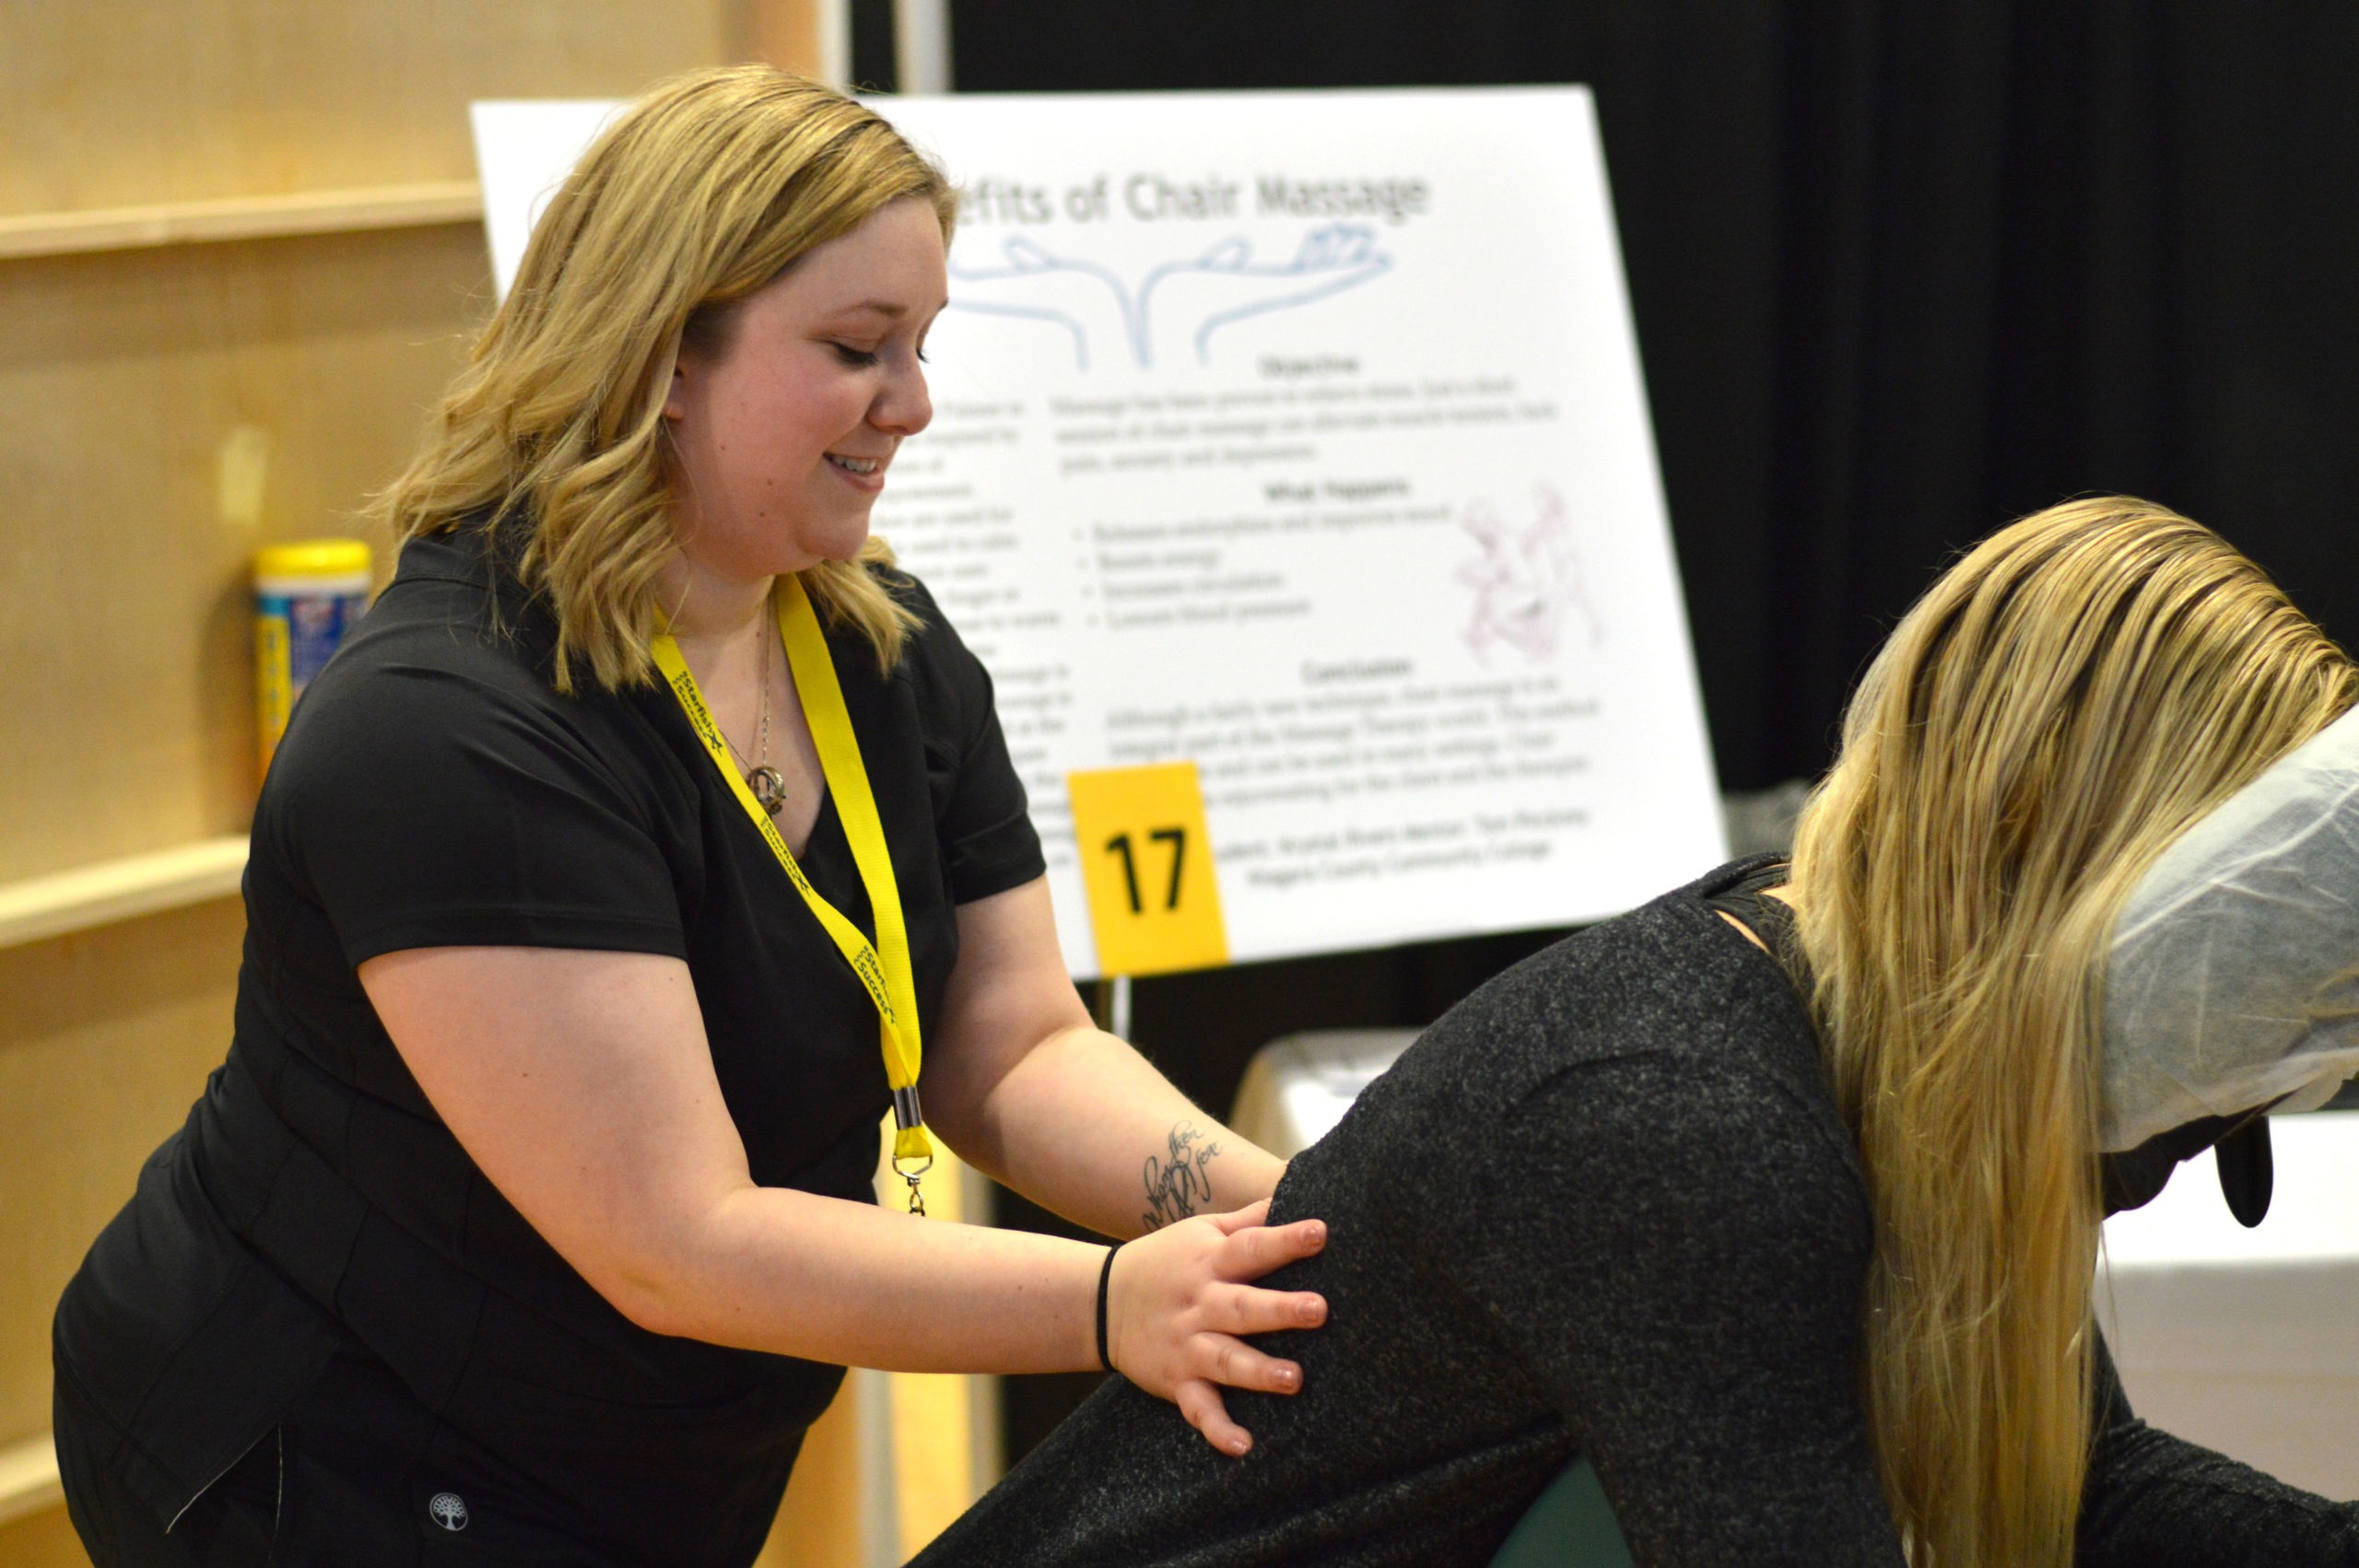 NCCC Massage Therapy student provides chair massage